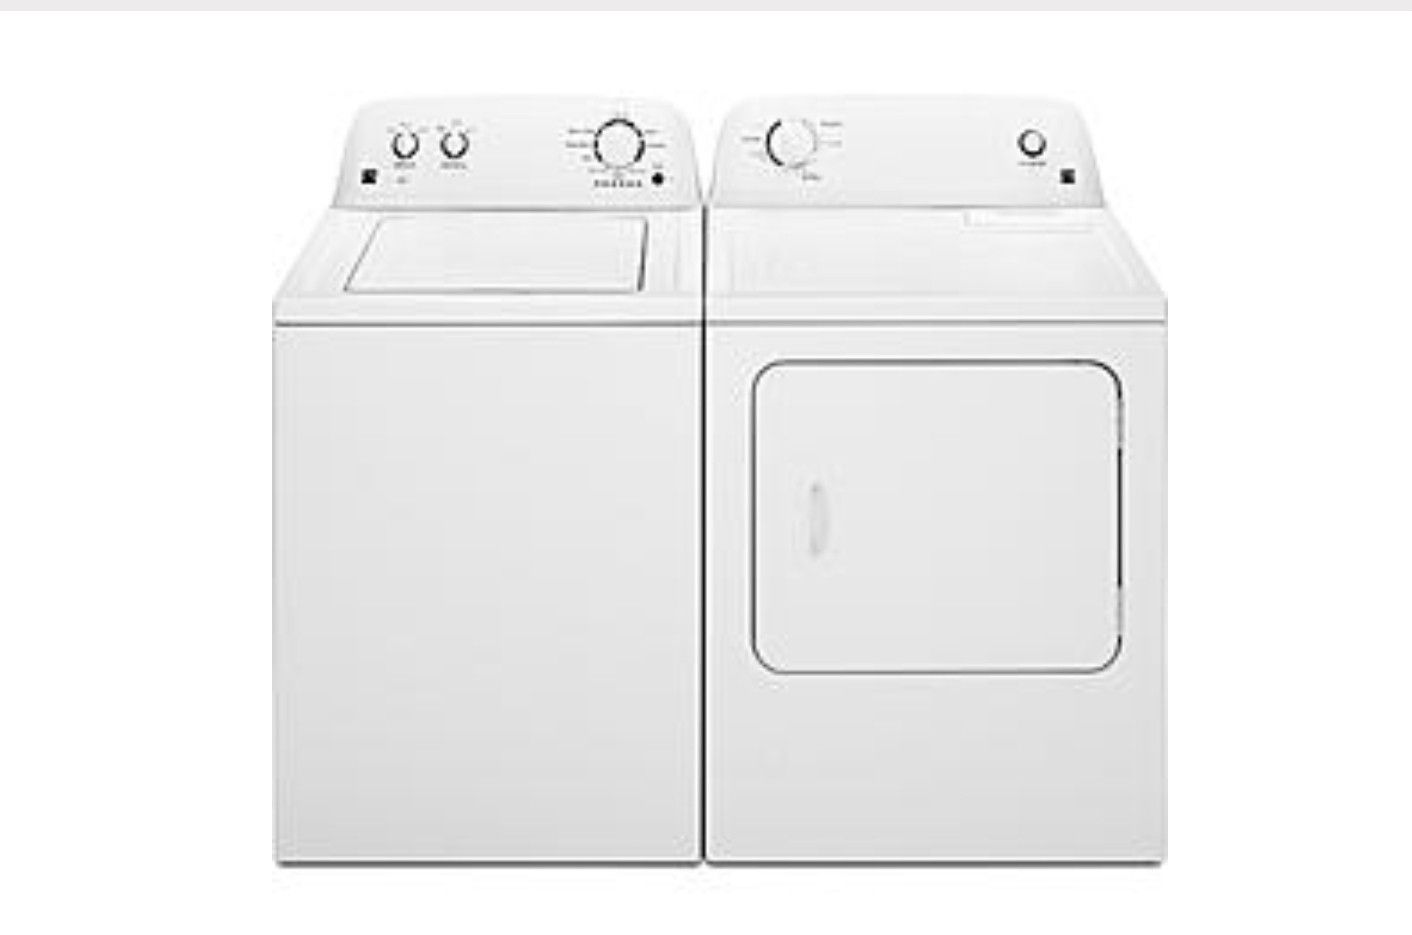 Kenmore 3.5 cu. ft. Top Load Washer w/Deep Fill & 6.5 cu. ft. Electric Dryer Bundle - White